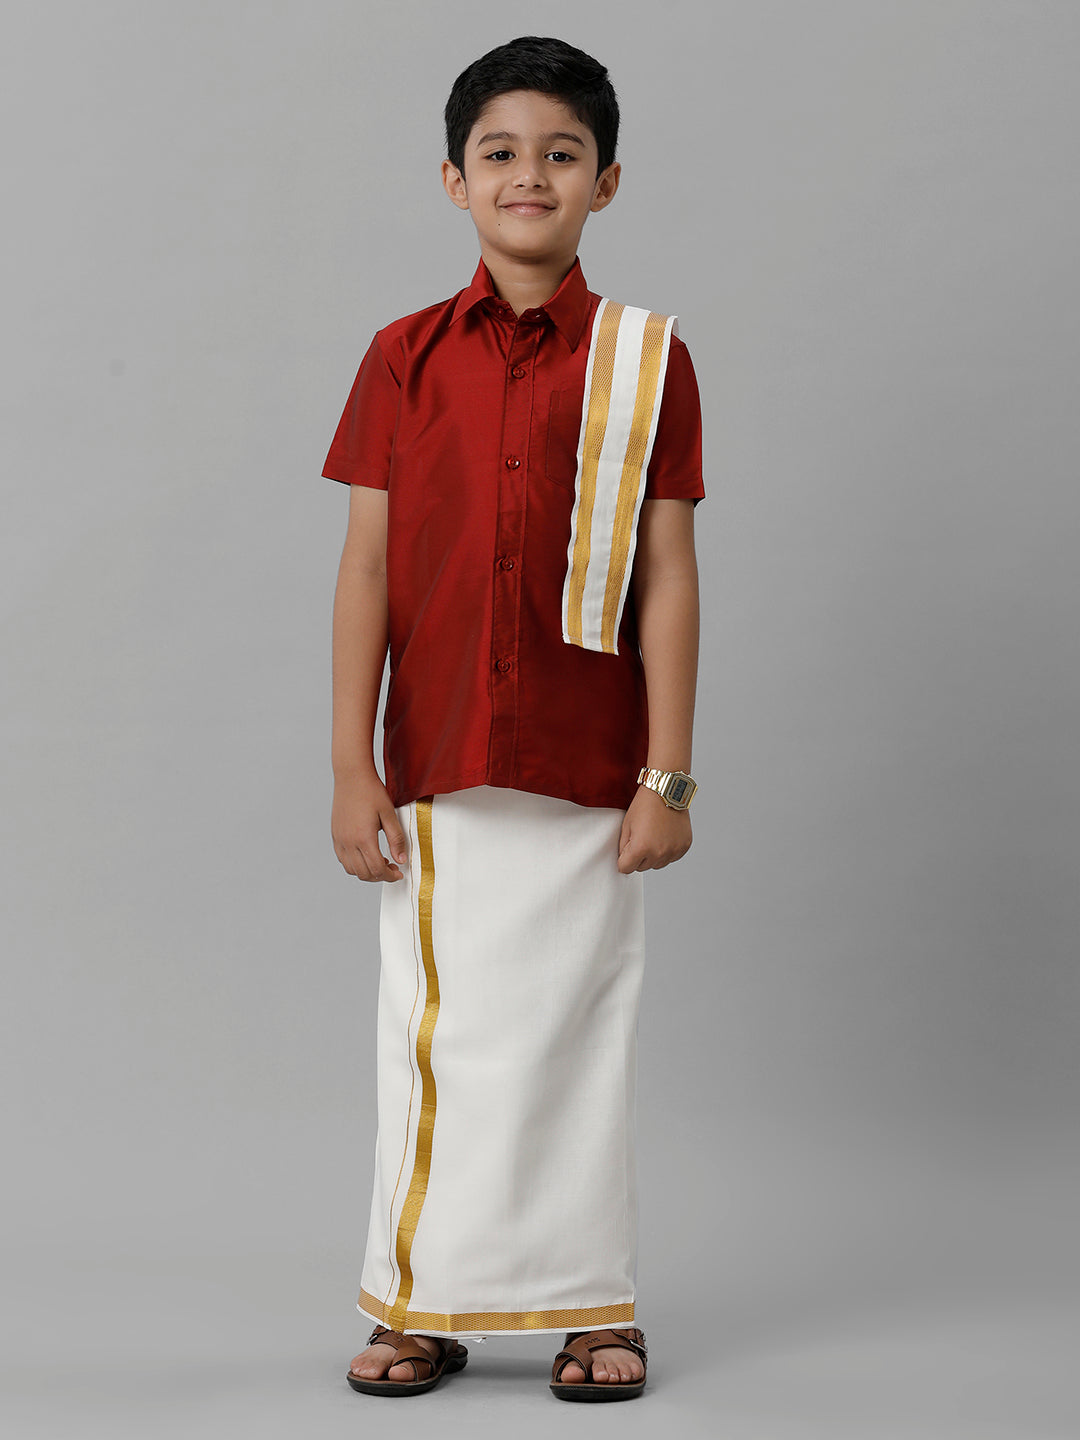 Boys Silk Cotton Red Half Sleeves Shirt with Adjustable Cream Dhoti Towel Combo K8-Front view